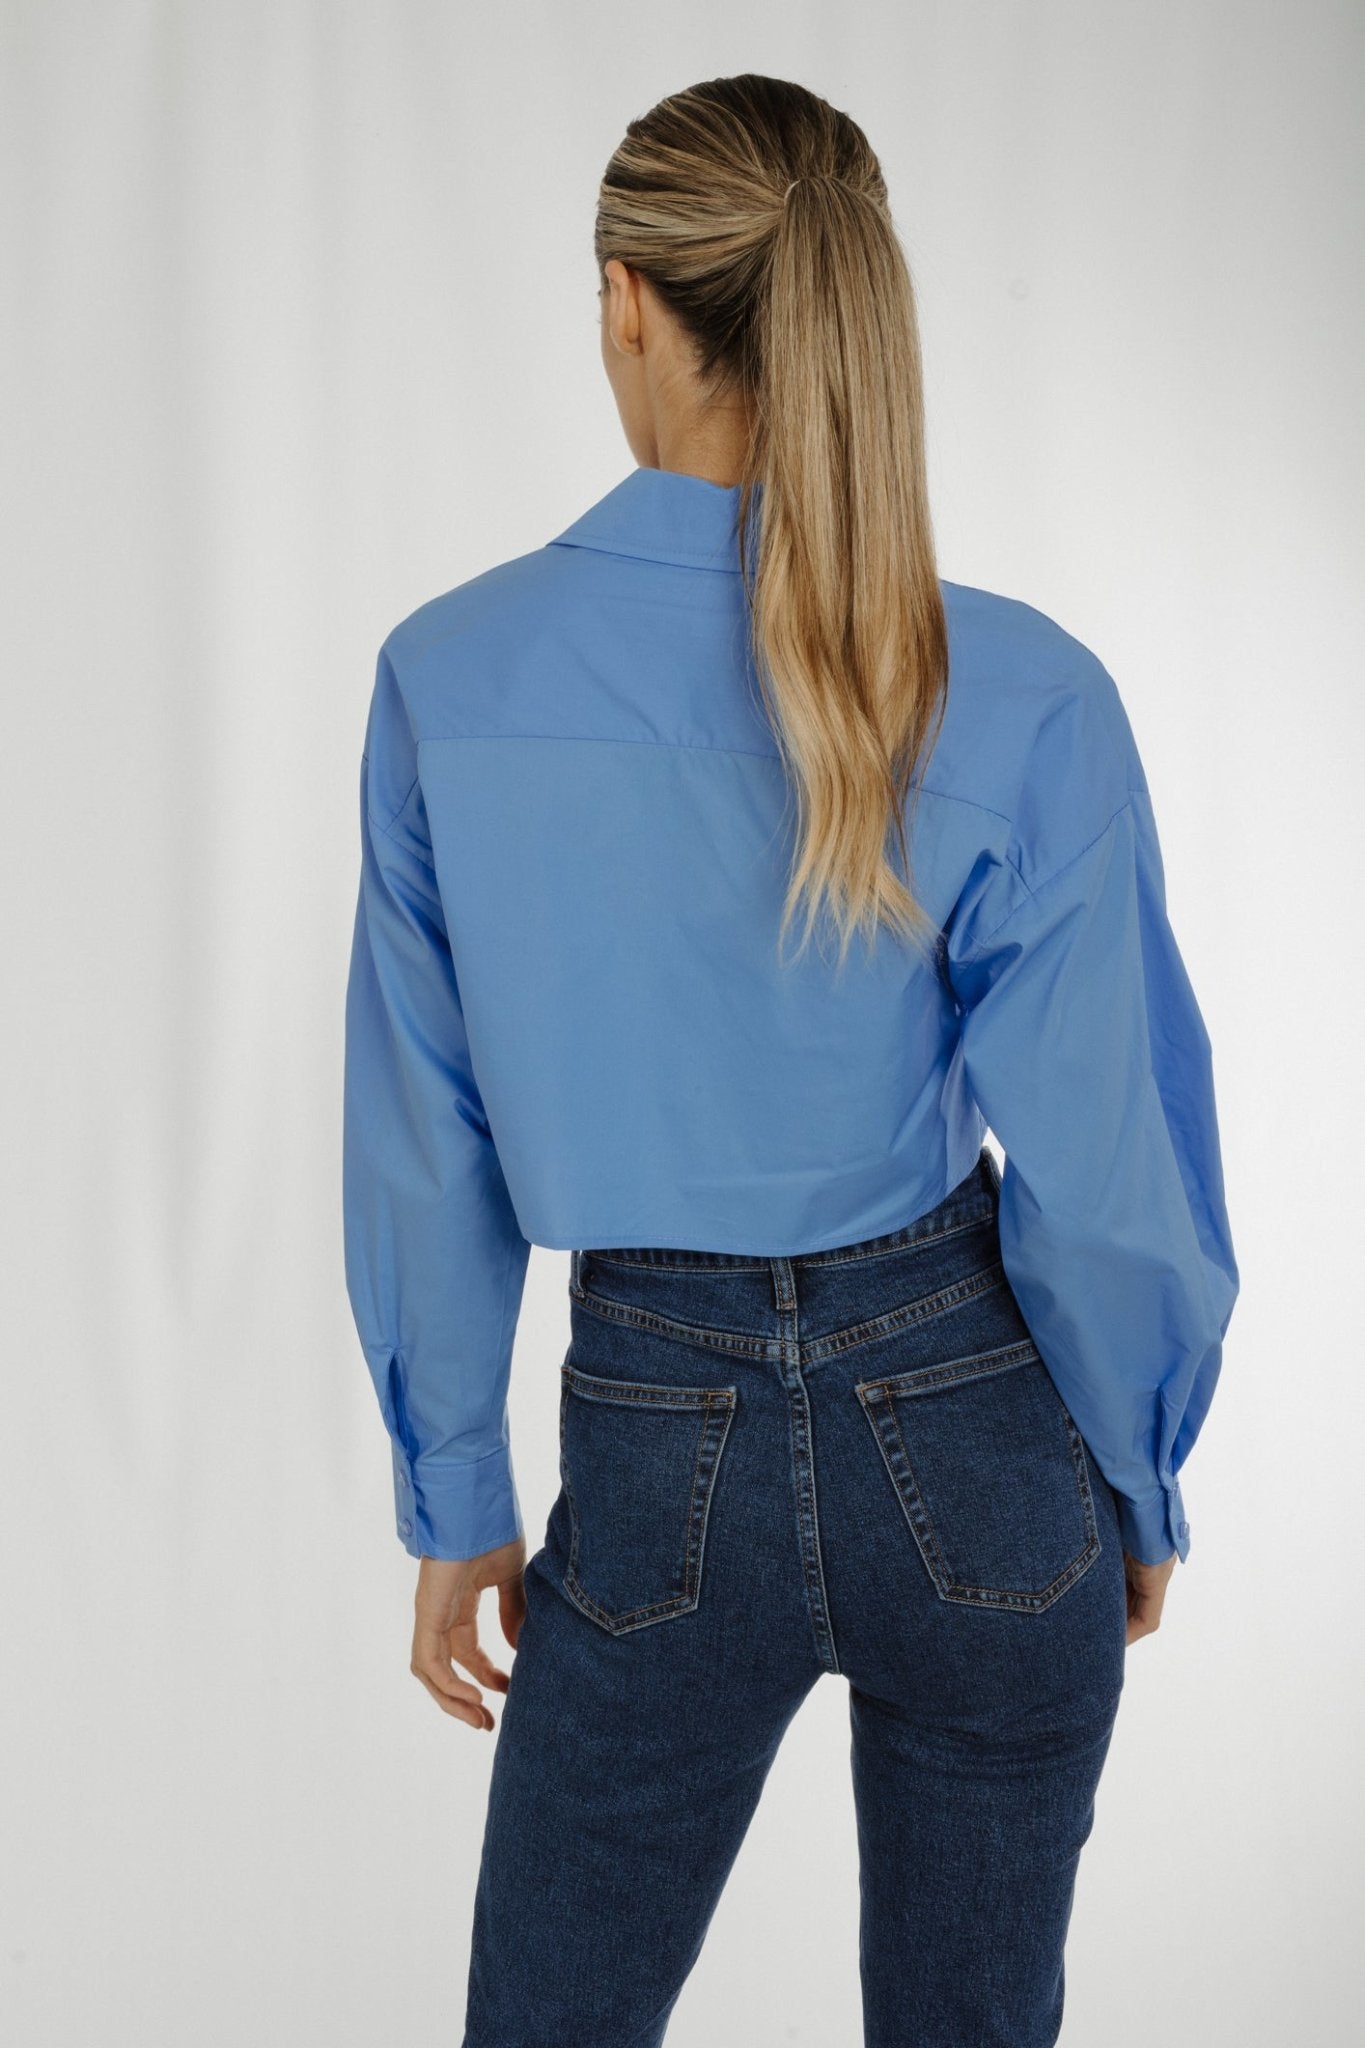 Lexi Cropped Shirt In Blue - The Walk in Wardrobe